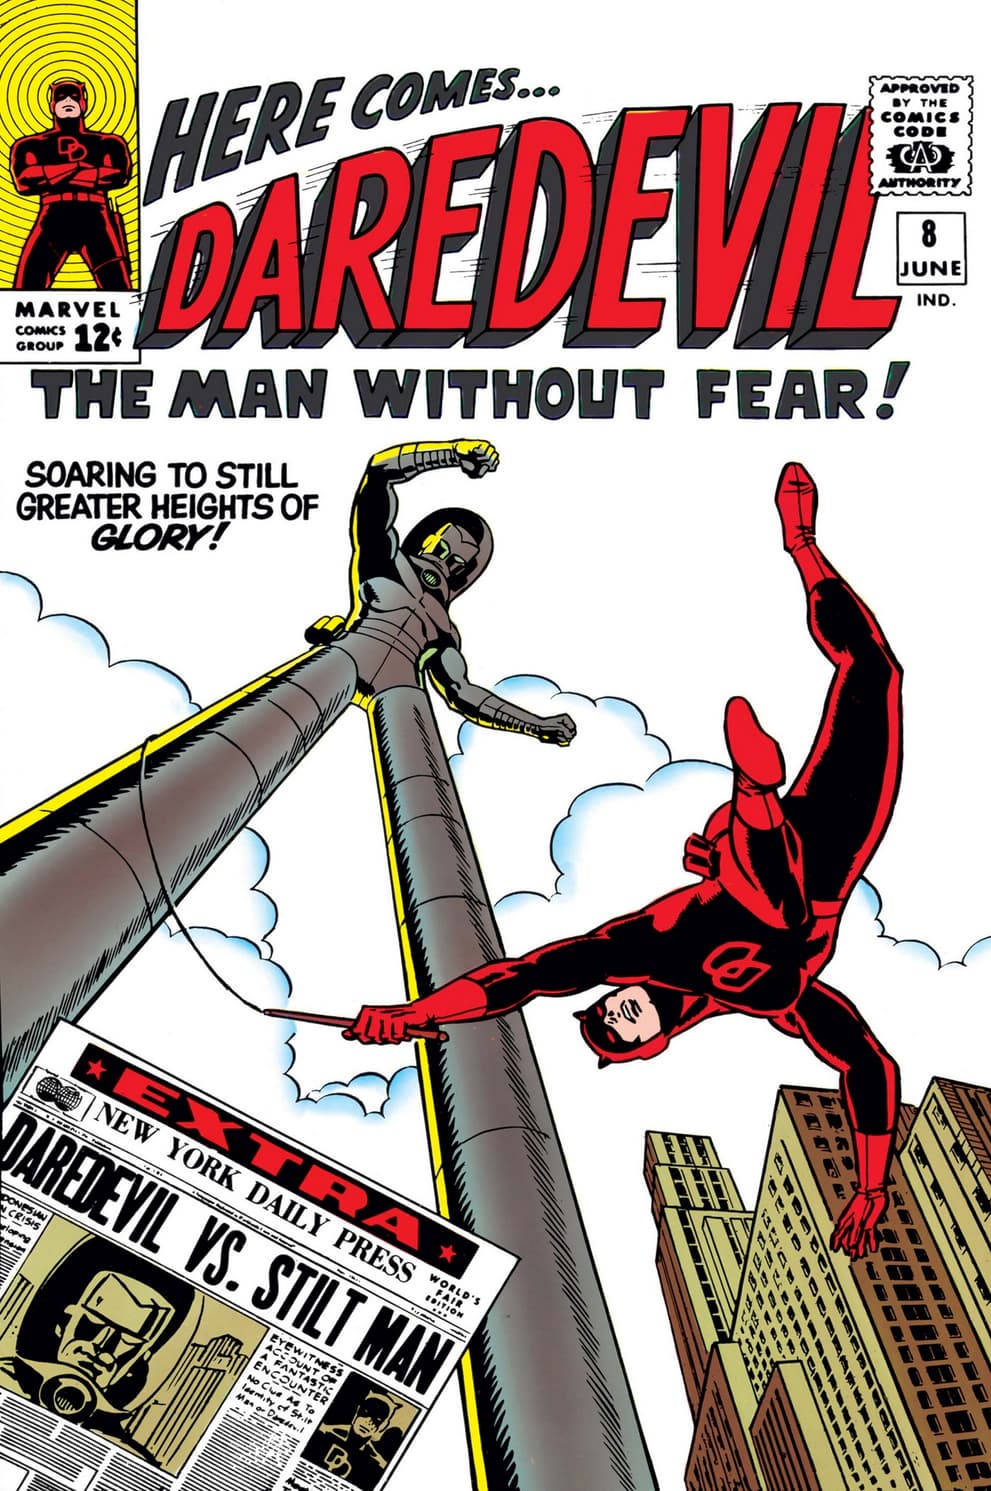 DAREDEVIL (1964) #8 cover by Wally Wood and Stan Goldberg